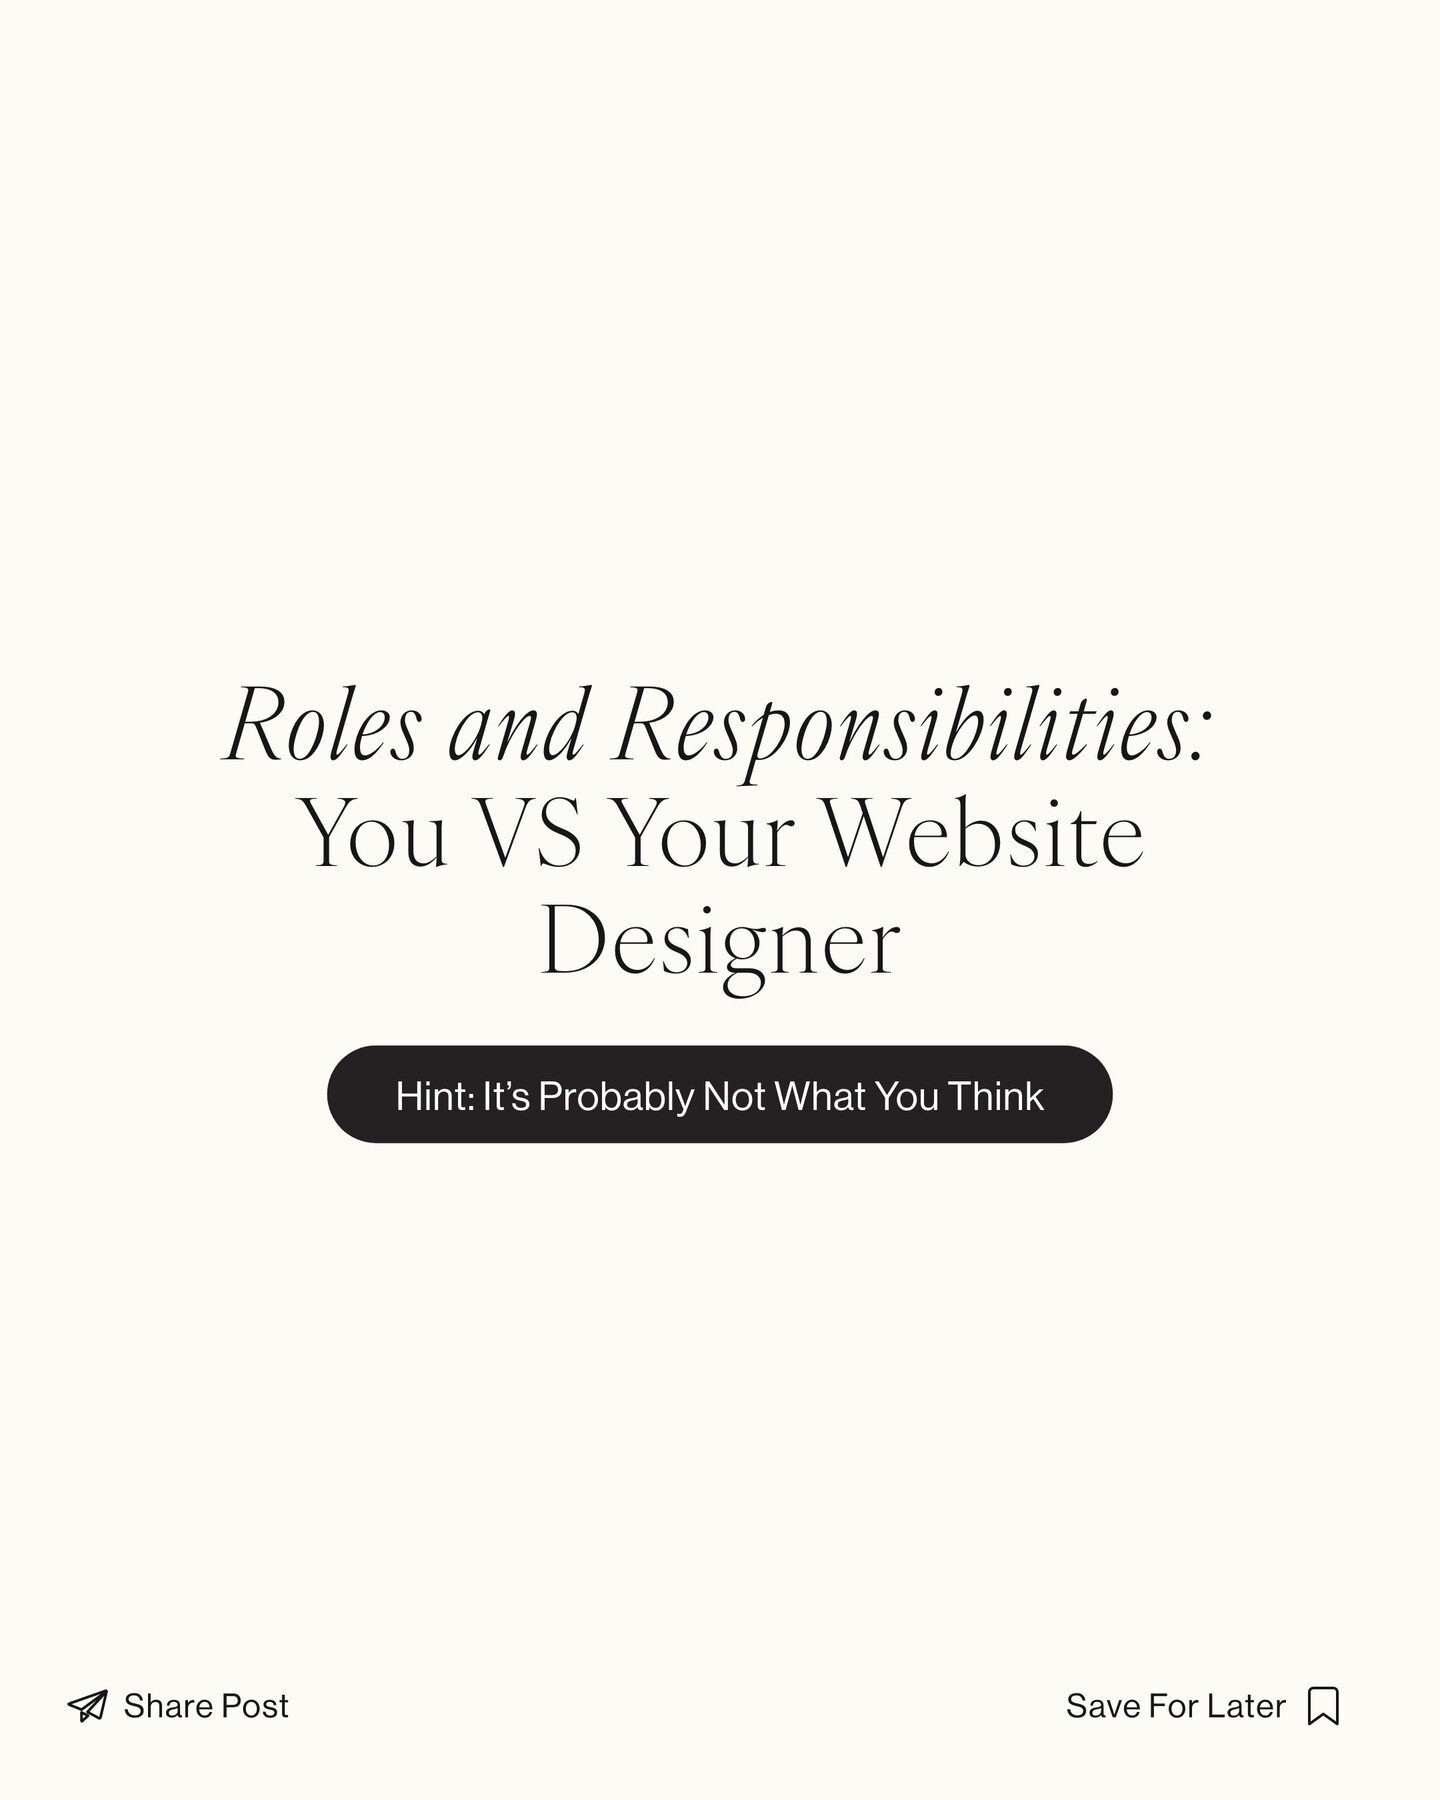 ROLES &amp; RESPONSIBILITIES &ndash; We are back! After a little holiday, we are here dropping some truth 💣 about the website design process.

The simple rule of thumb, the clearest way we can put it is:
If you need/want/DESIRE something to go on a 